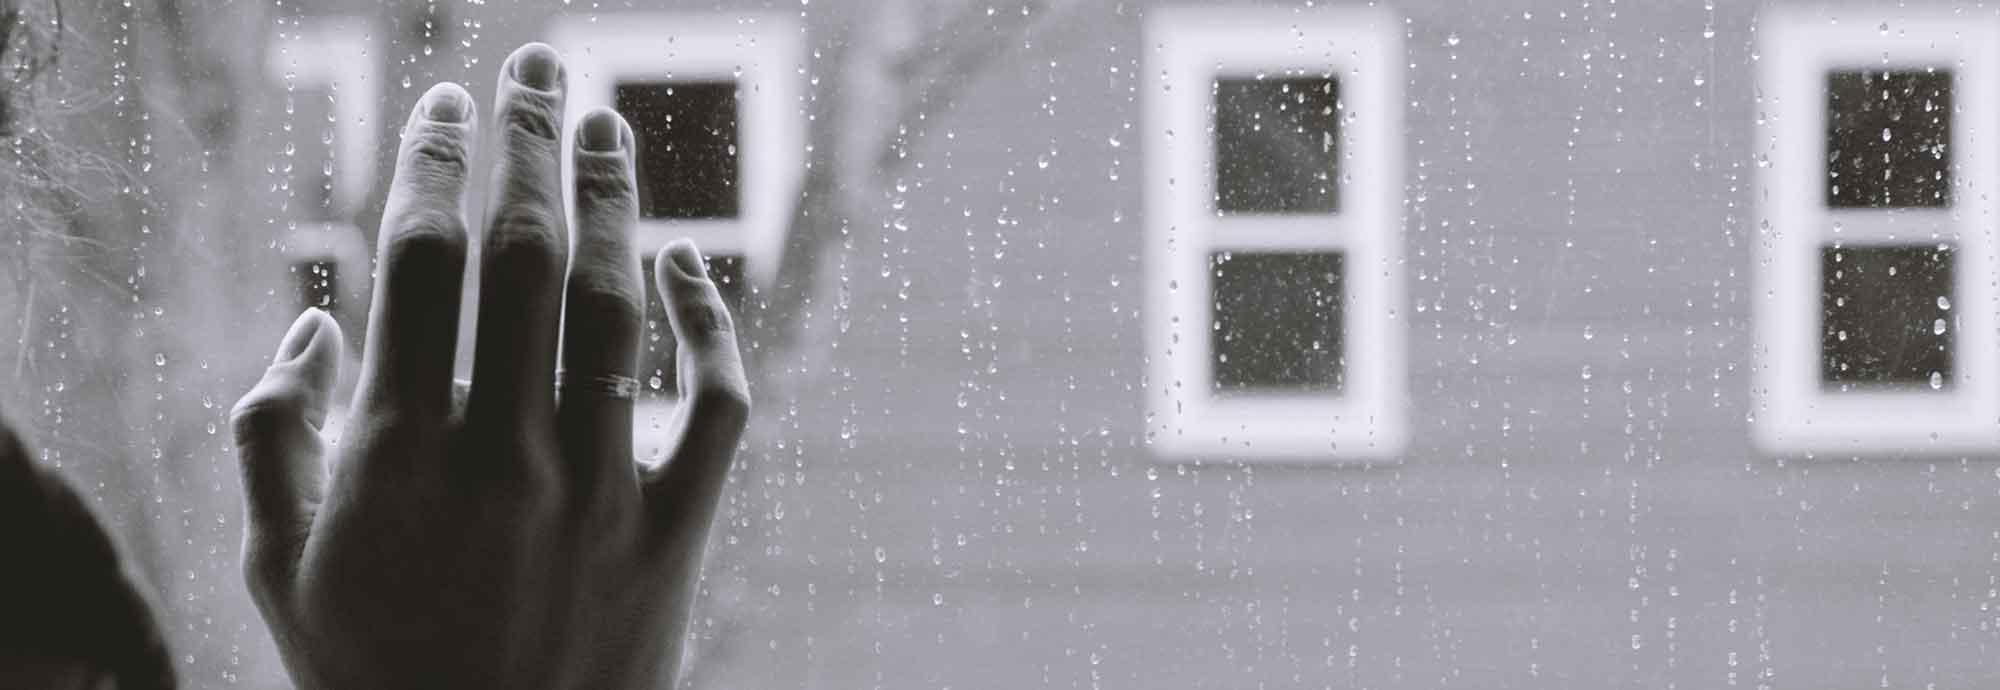 someone’s hand placed on a rainy window, looking out at other windows